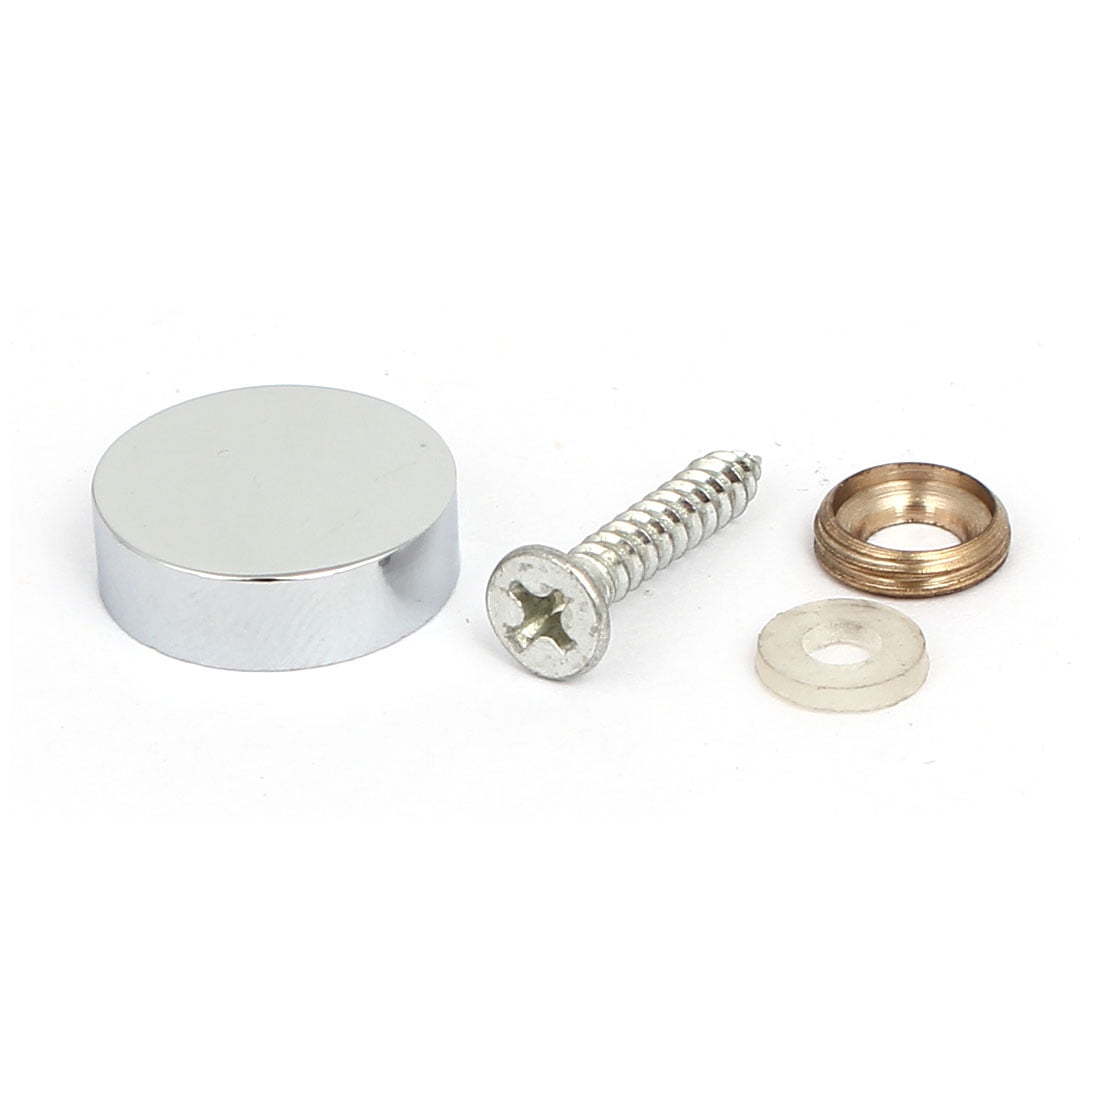 Details about   Stainless Steel Decorative Advertising Mirror Screws Cap Cover Nails 12mm-40mm 